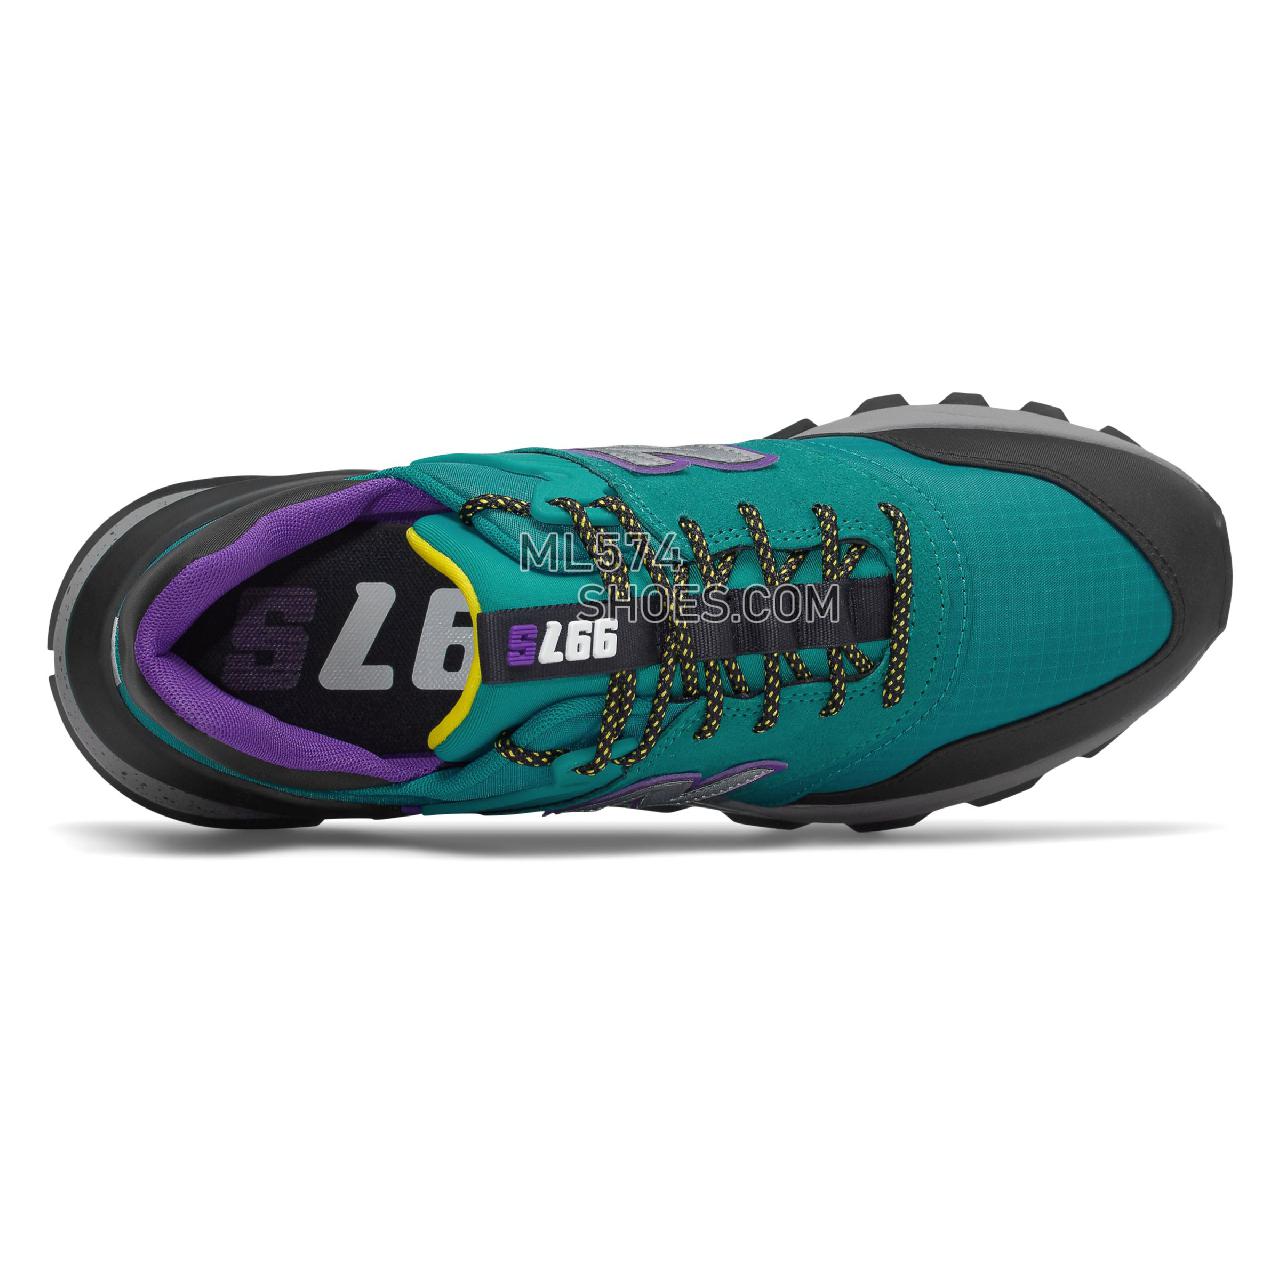 New Balance 997 Sport - Men's Sport Style Sneakers - Team Teal with Black and Yellow - MS997SKA